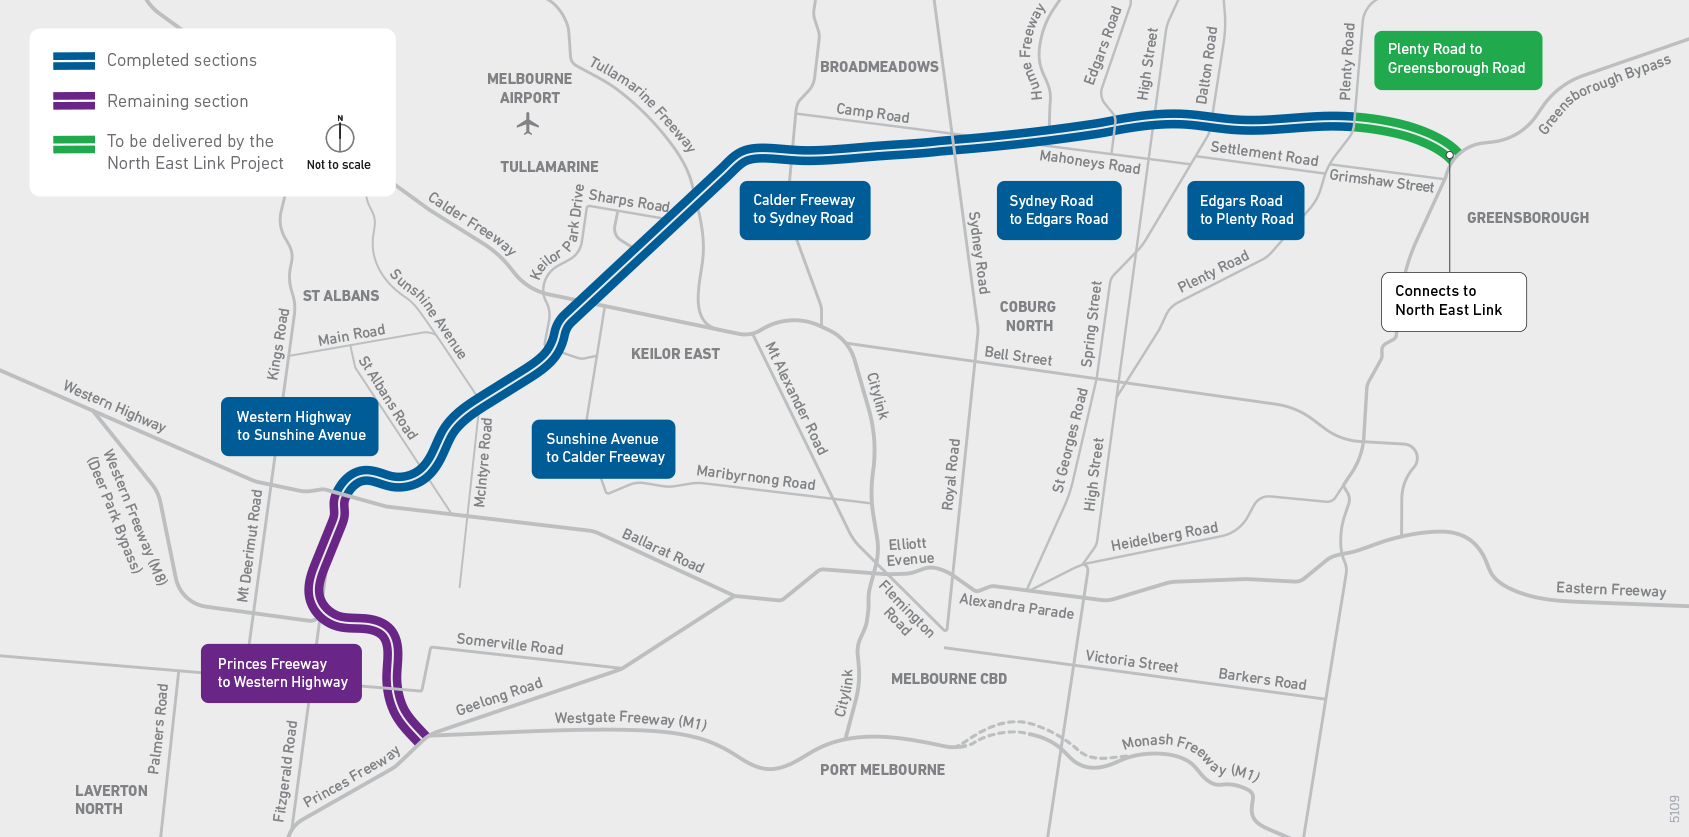 M80 Project Overview Map - Sydney to Edgars Rd Completion